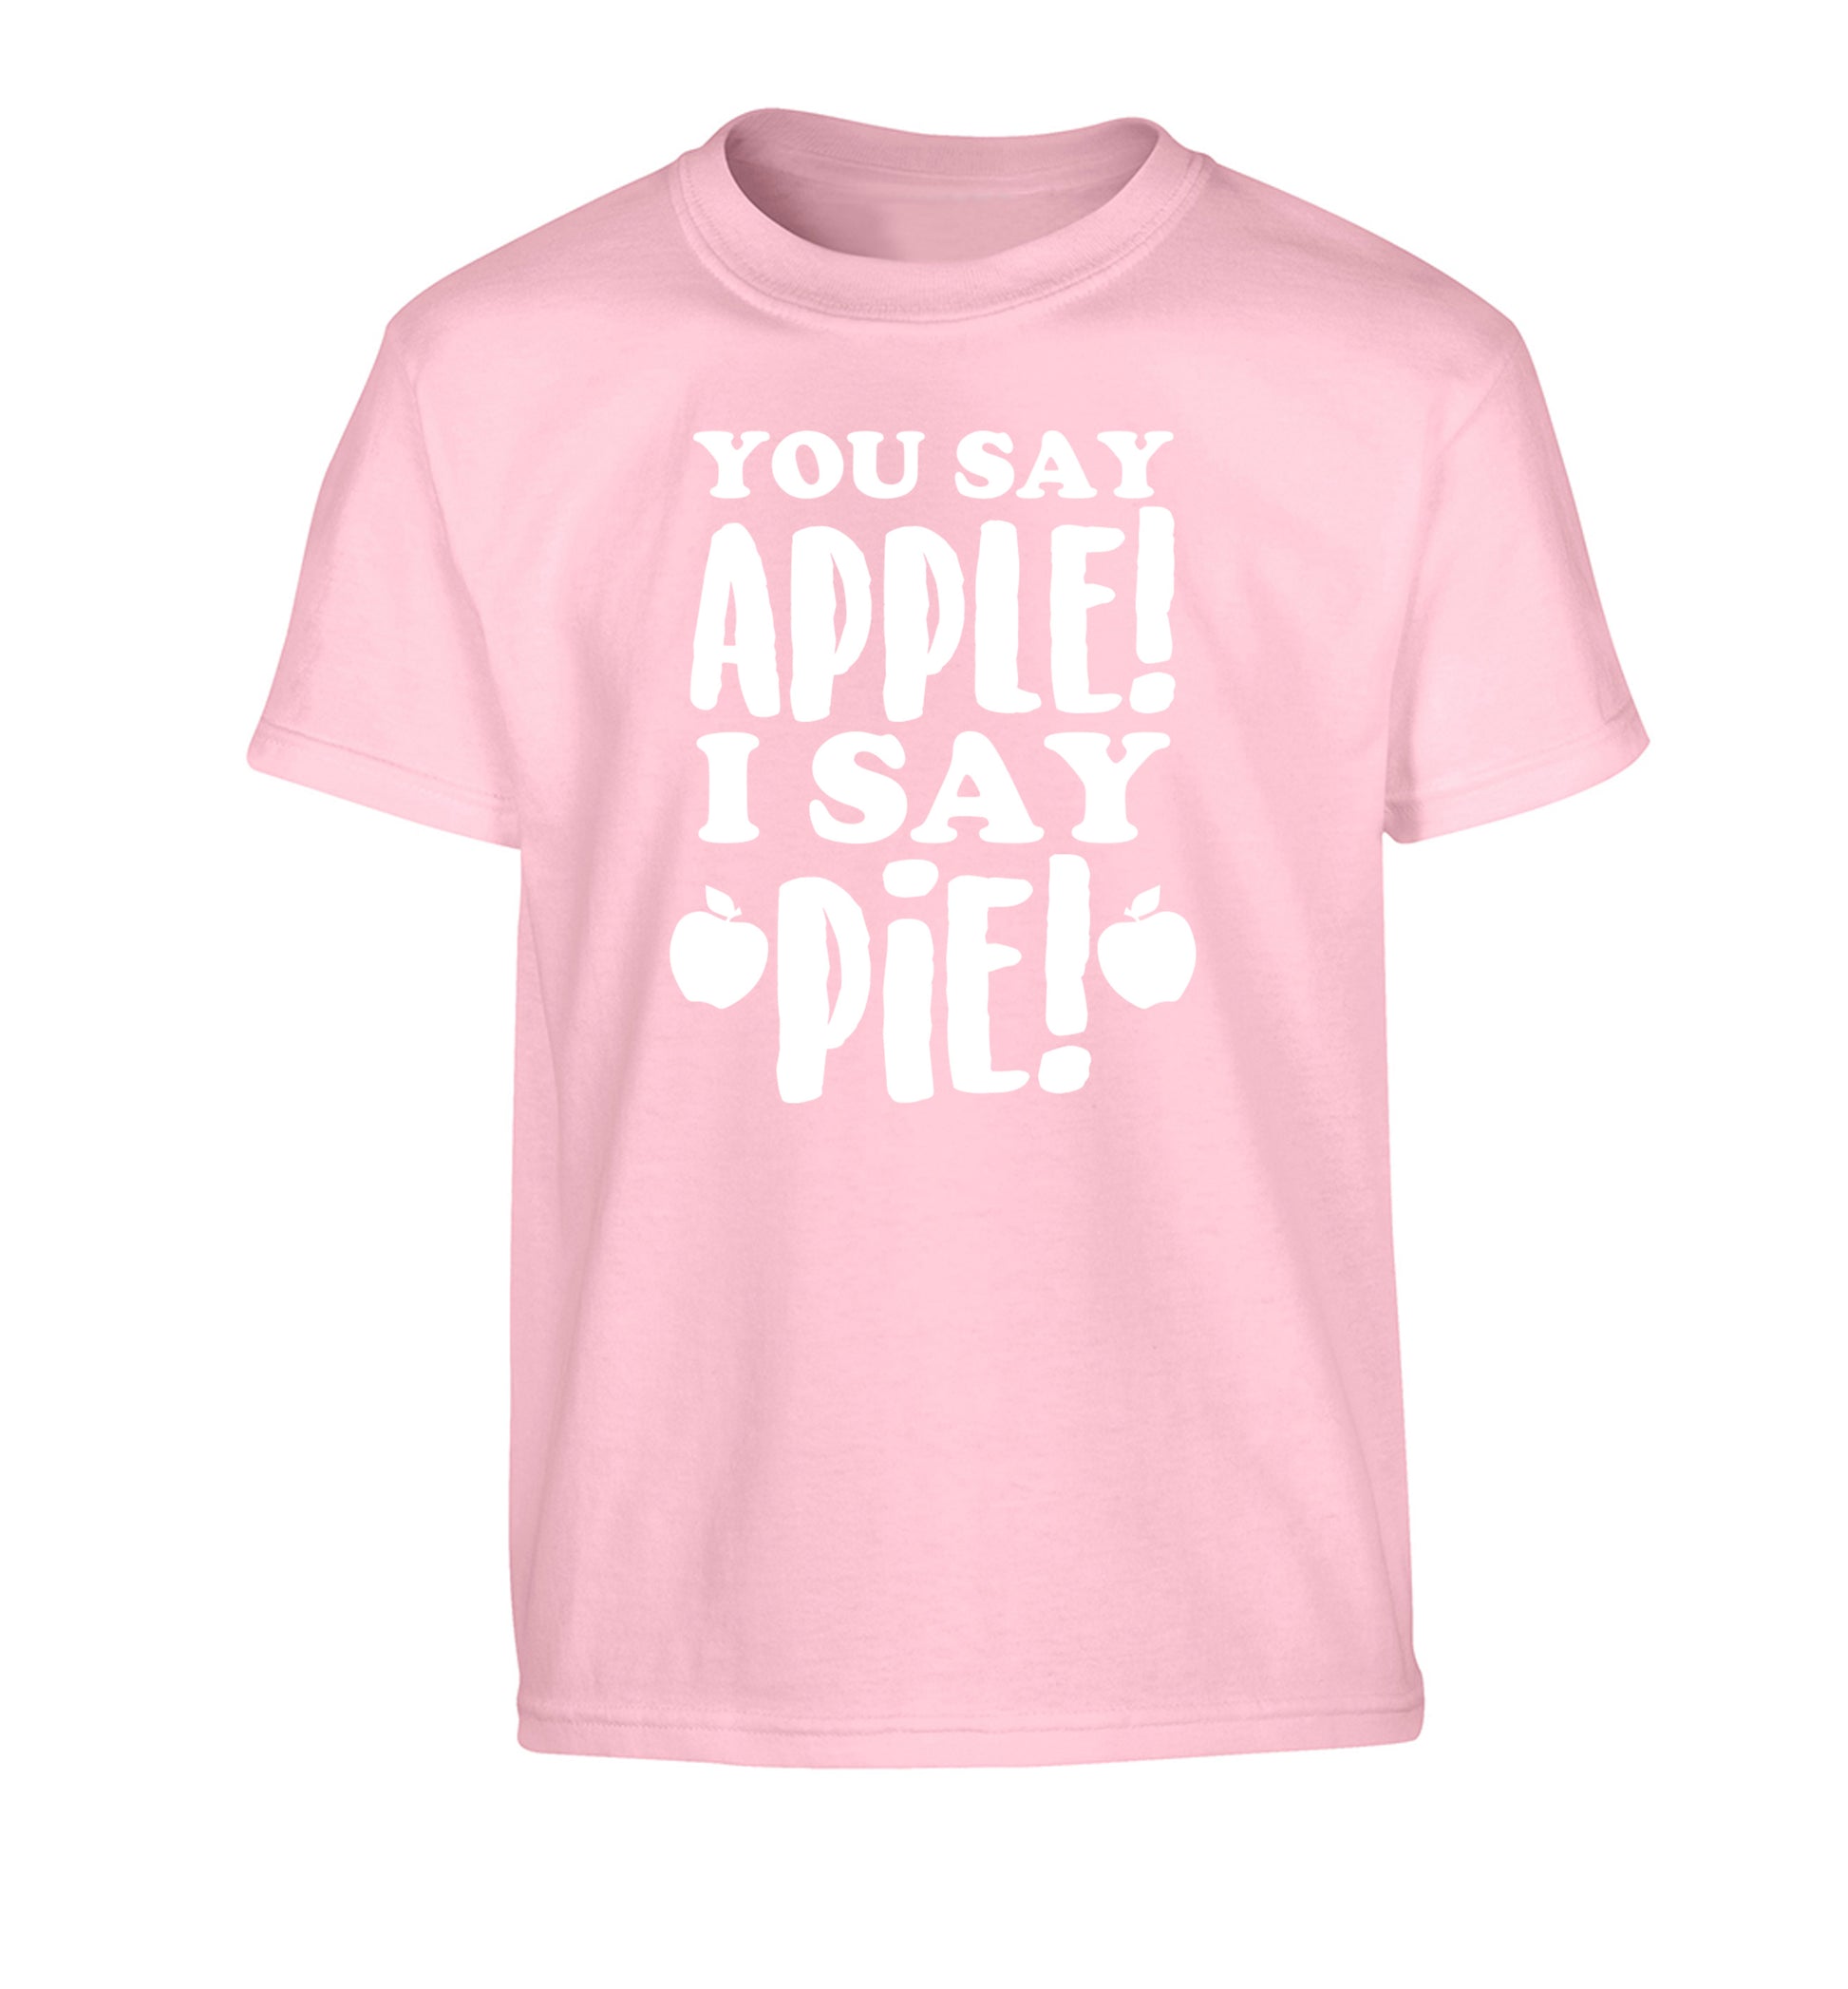 You say apple I say pie! Children's light pink Tshirt 12-14 Years